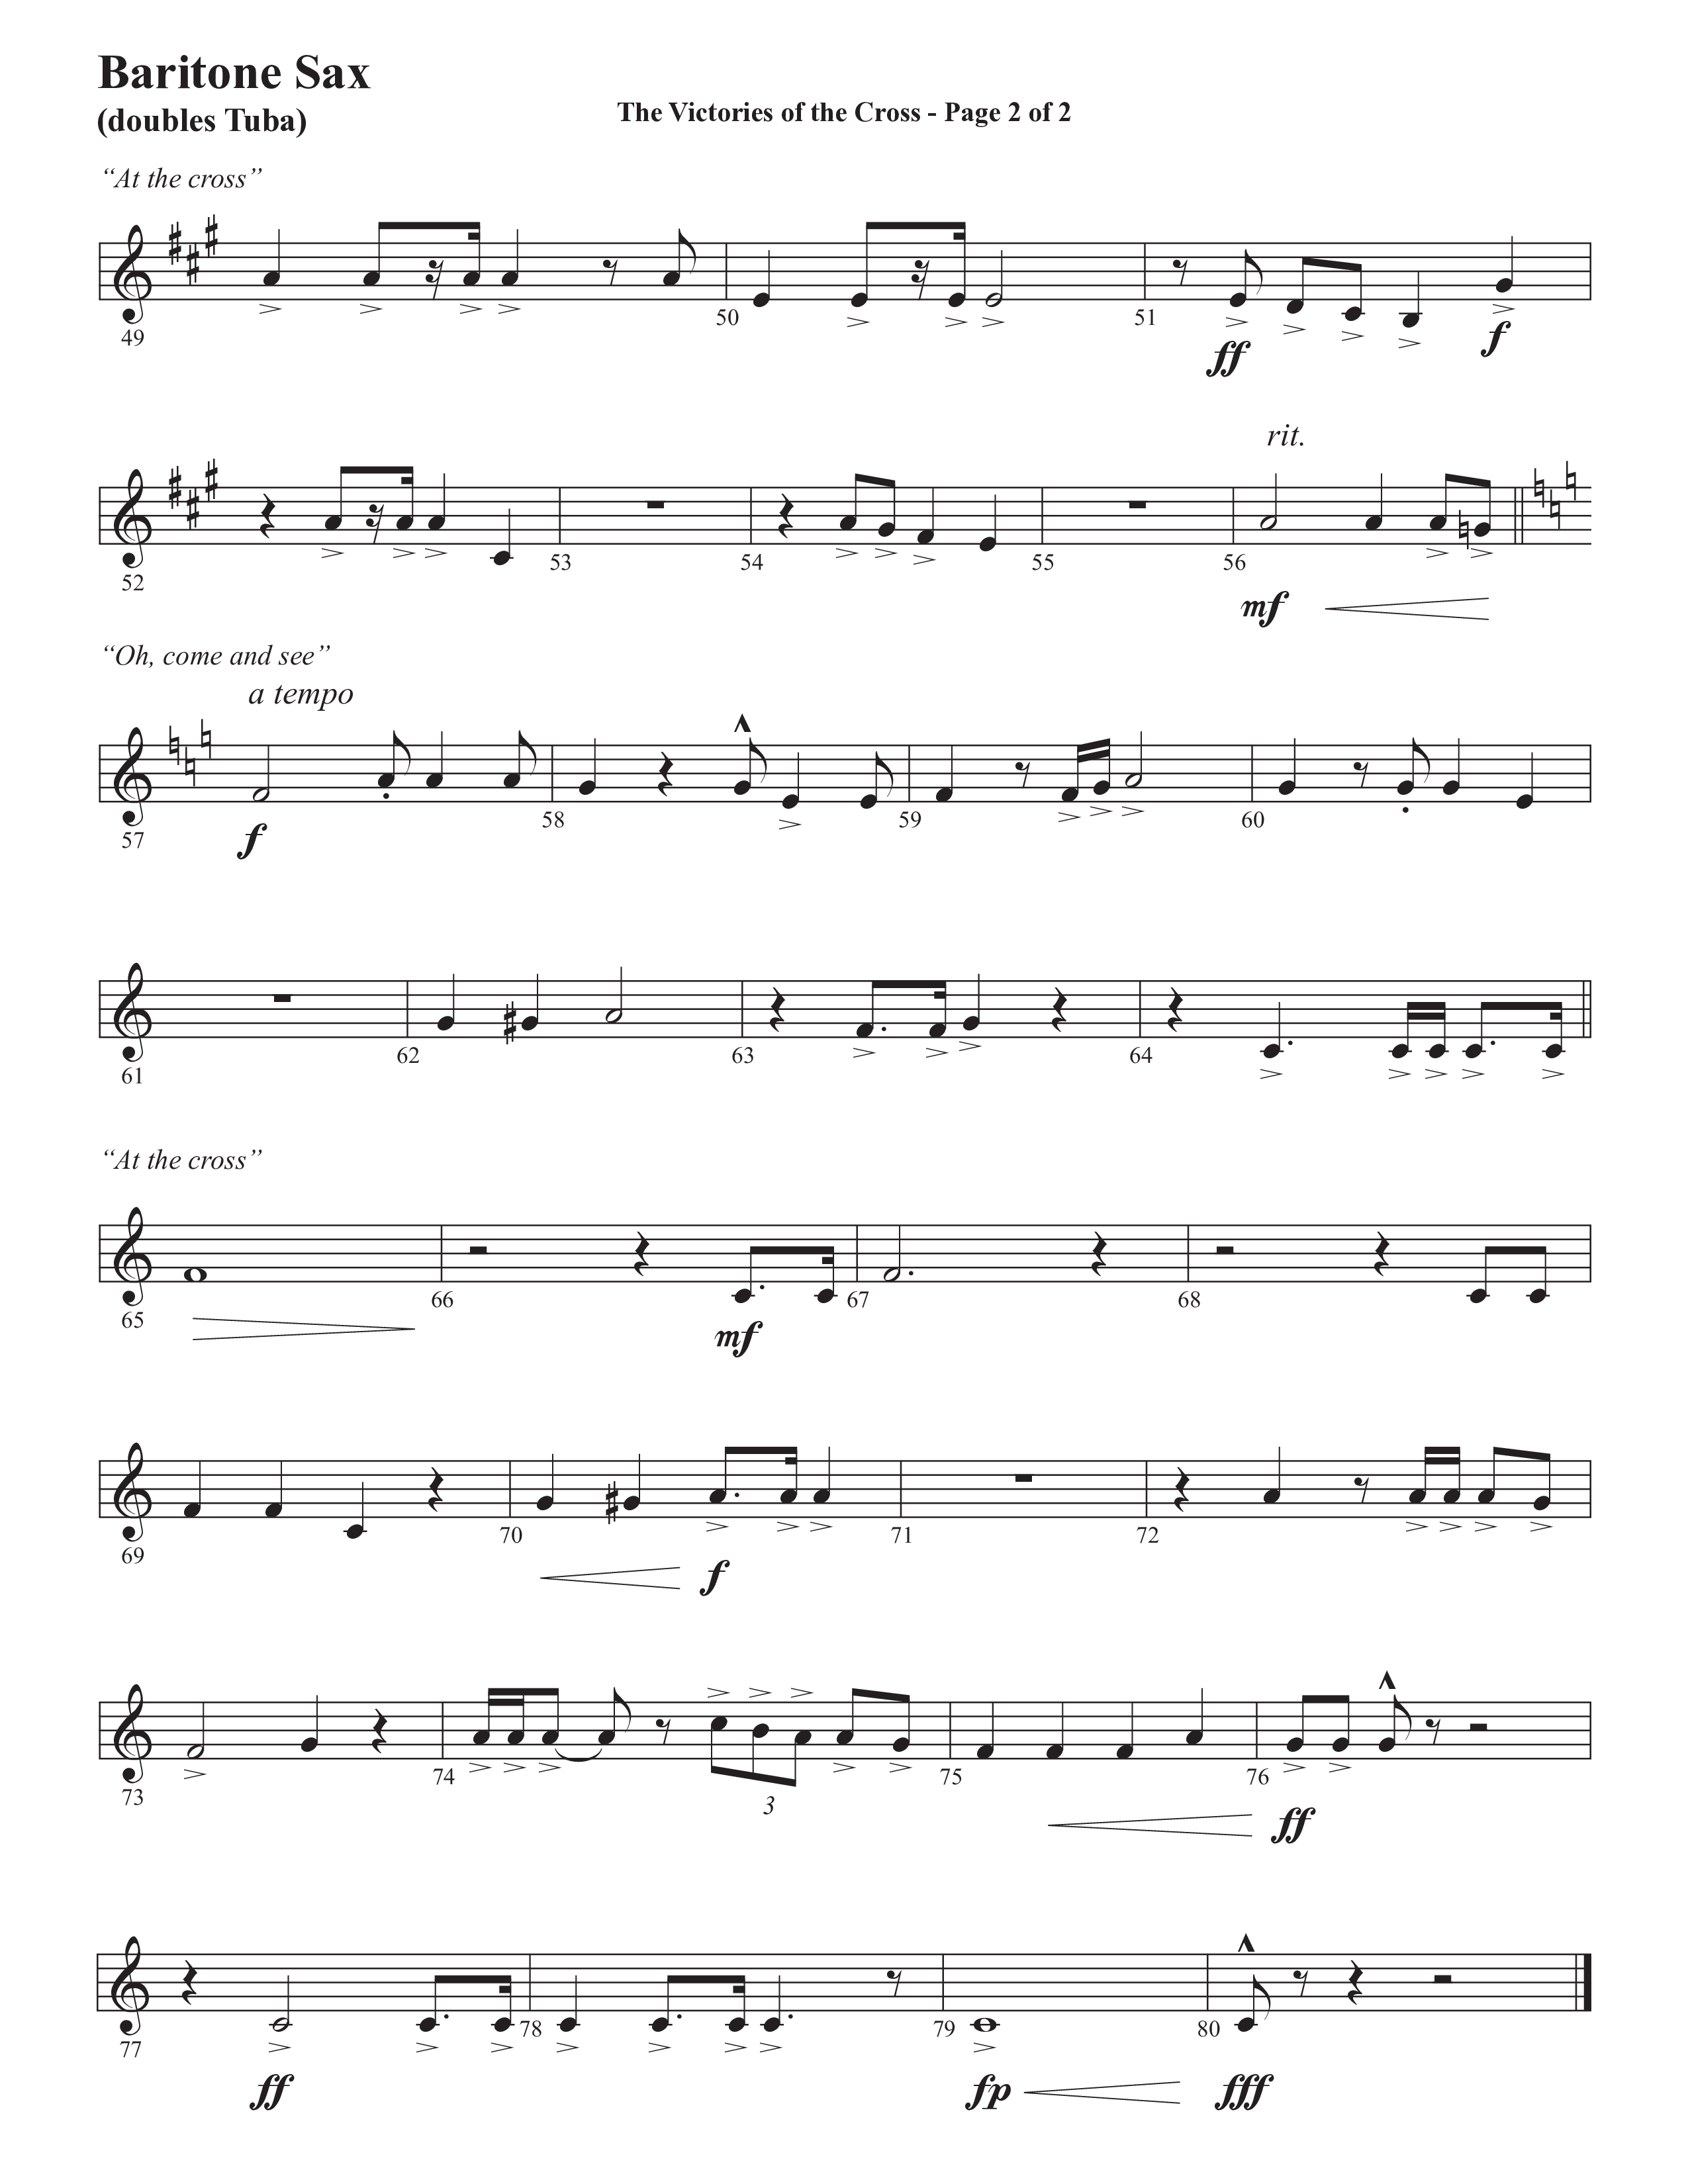 The Victories Of The Cross (with At The Cross) (Choral Anthem SATB) Bari Sax (Semsen Music / Arr. Daniel Semsen)